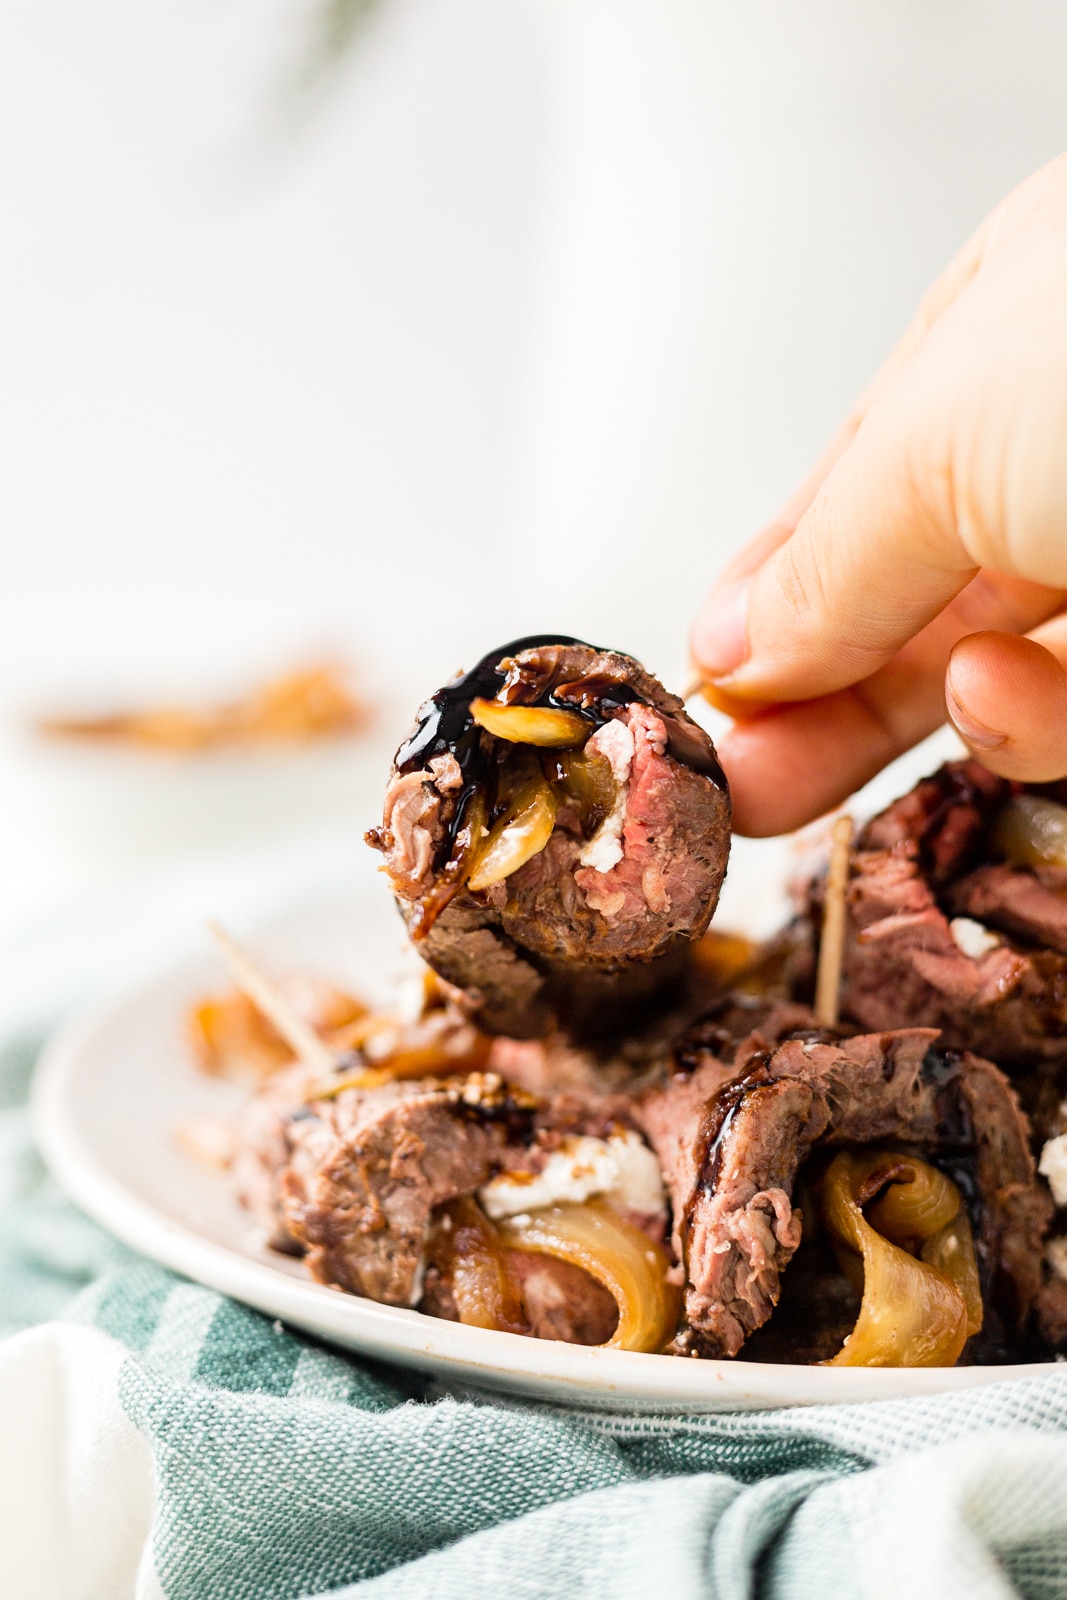 beef tenderloin wrapped around goat cheese and caramelized onion with a balsamic glaze